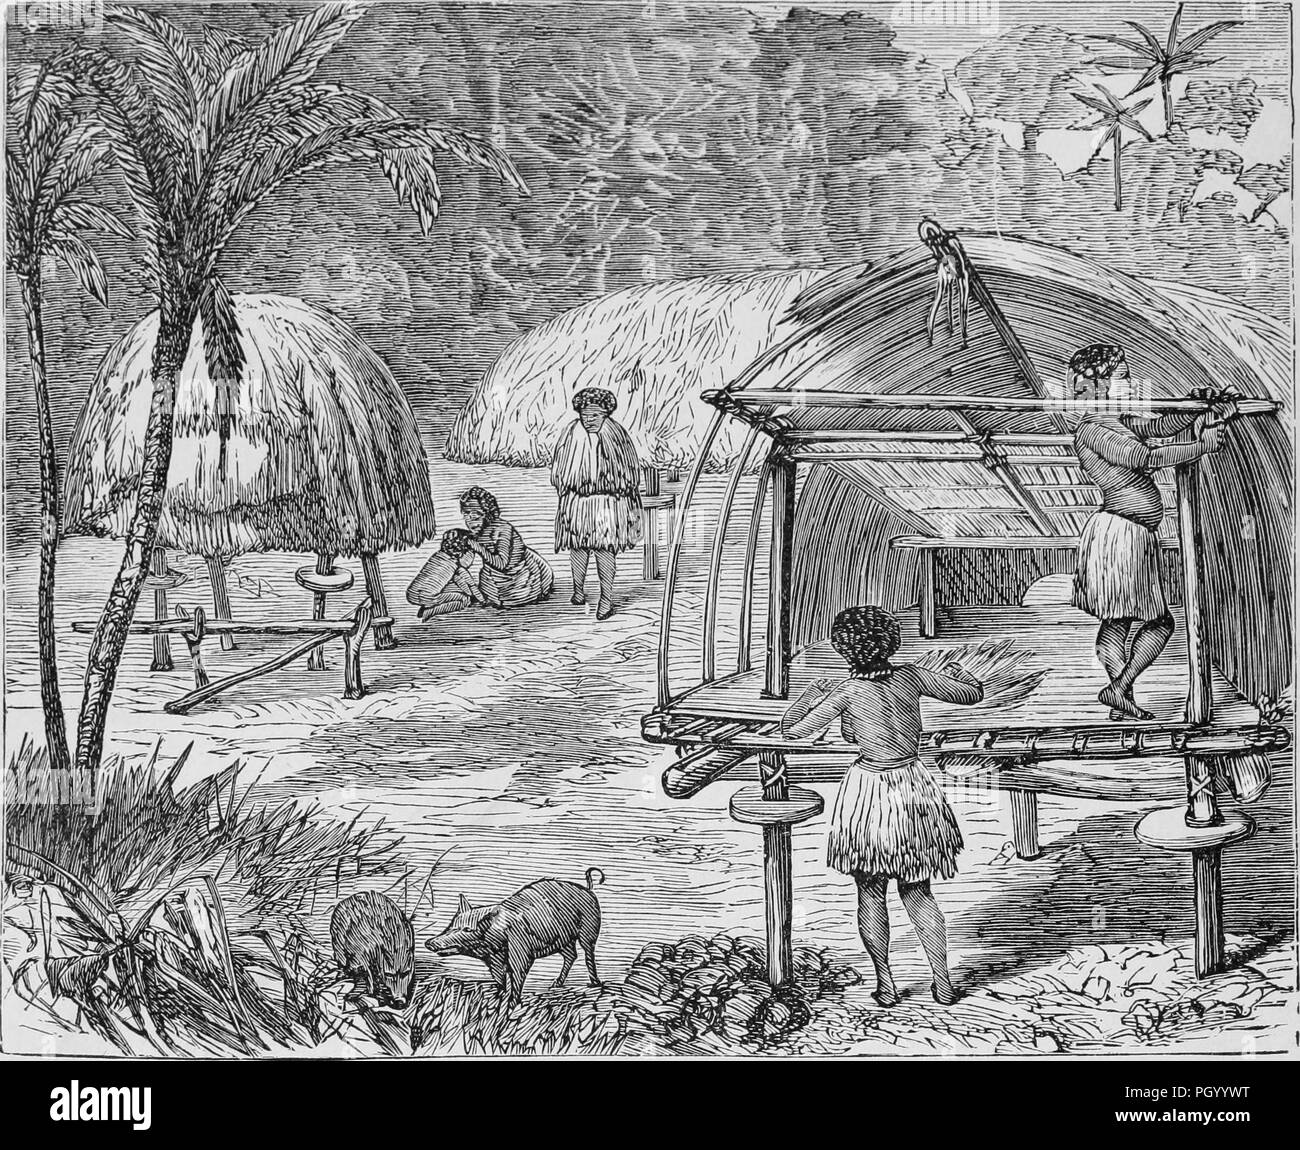 Black and white vintage print, depicting several New Guineans erecting a thatched roof building that is elevated on posts, with a small, thatched roundhouse in the background, published in John George Wood's volume 'The uncivilized races of men in all countries of the world, being a comprehensive account of their manners and customs, and of their physical, social, mental, moral and religious characteristics', 1877. Courtesy Internet Archive. () Stock Photo